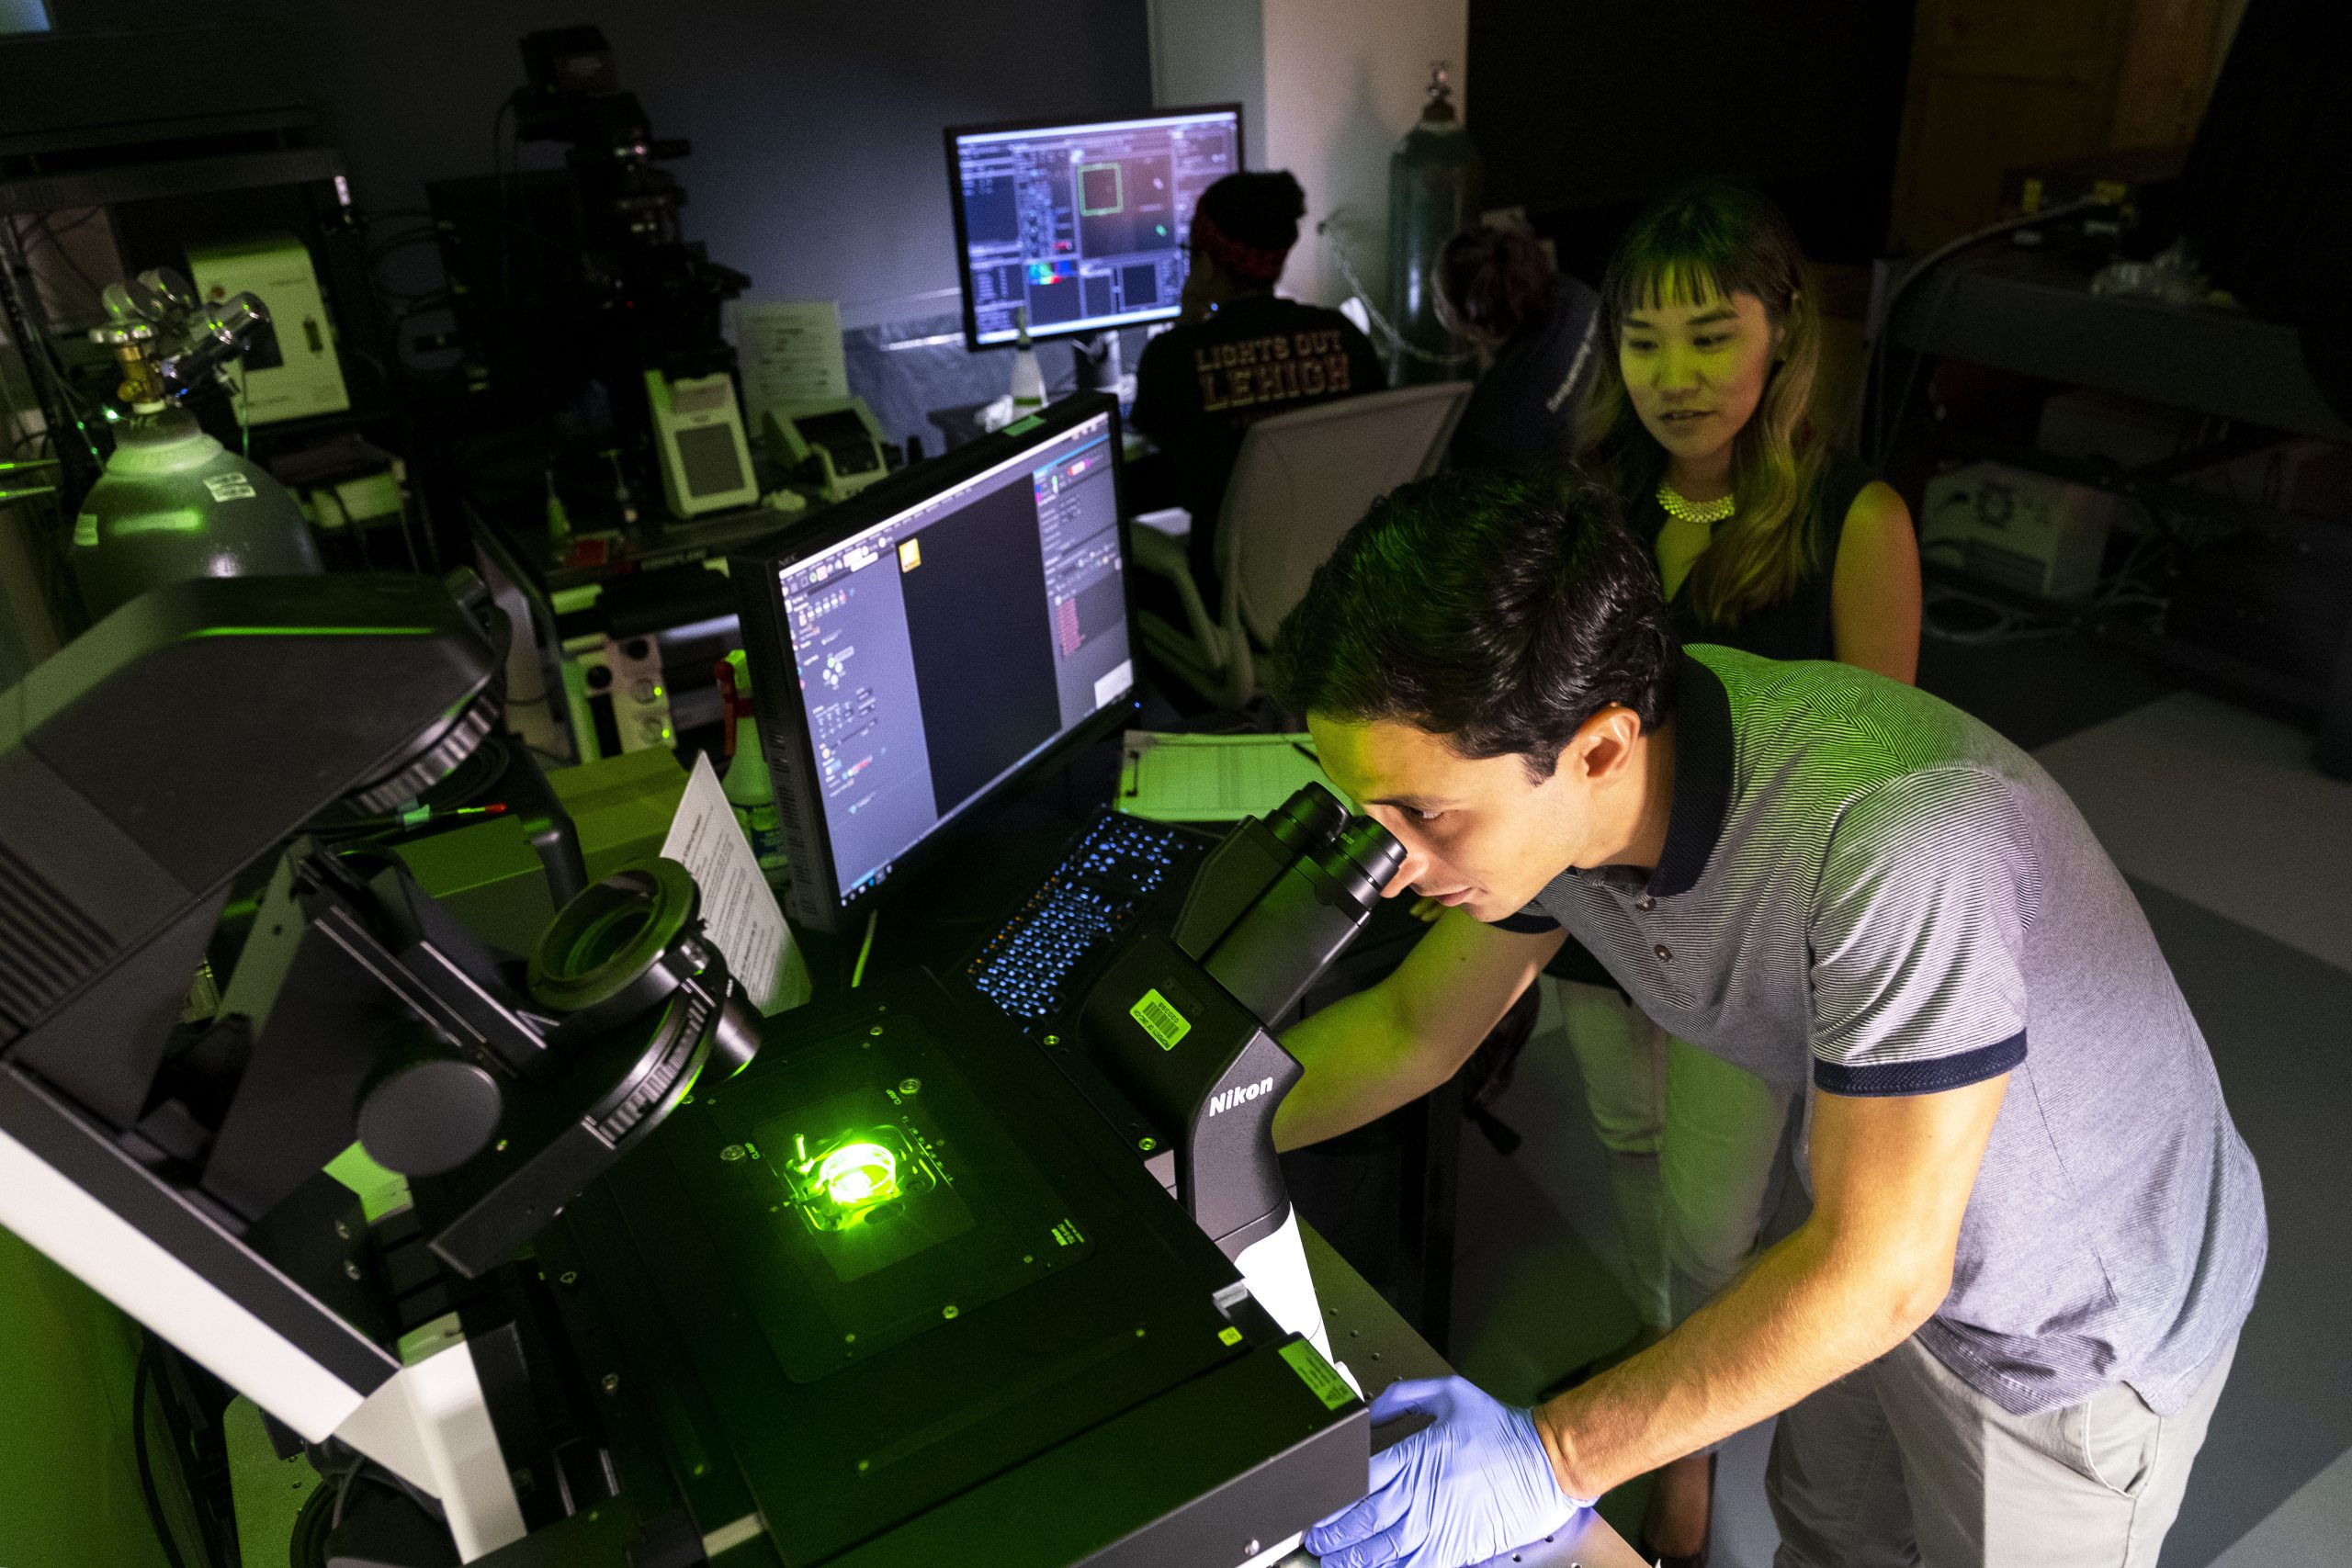 Michelle Itano, Director of the UNC NeuroscienceMicroscopy Core Facility, watches Hernán Méndez, a UNC graduate research assistant., work on a microscope